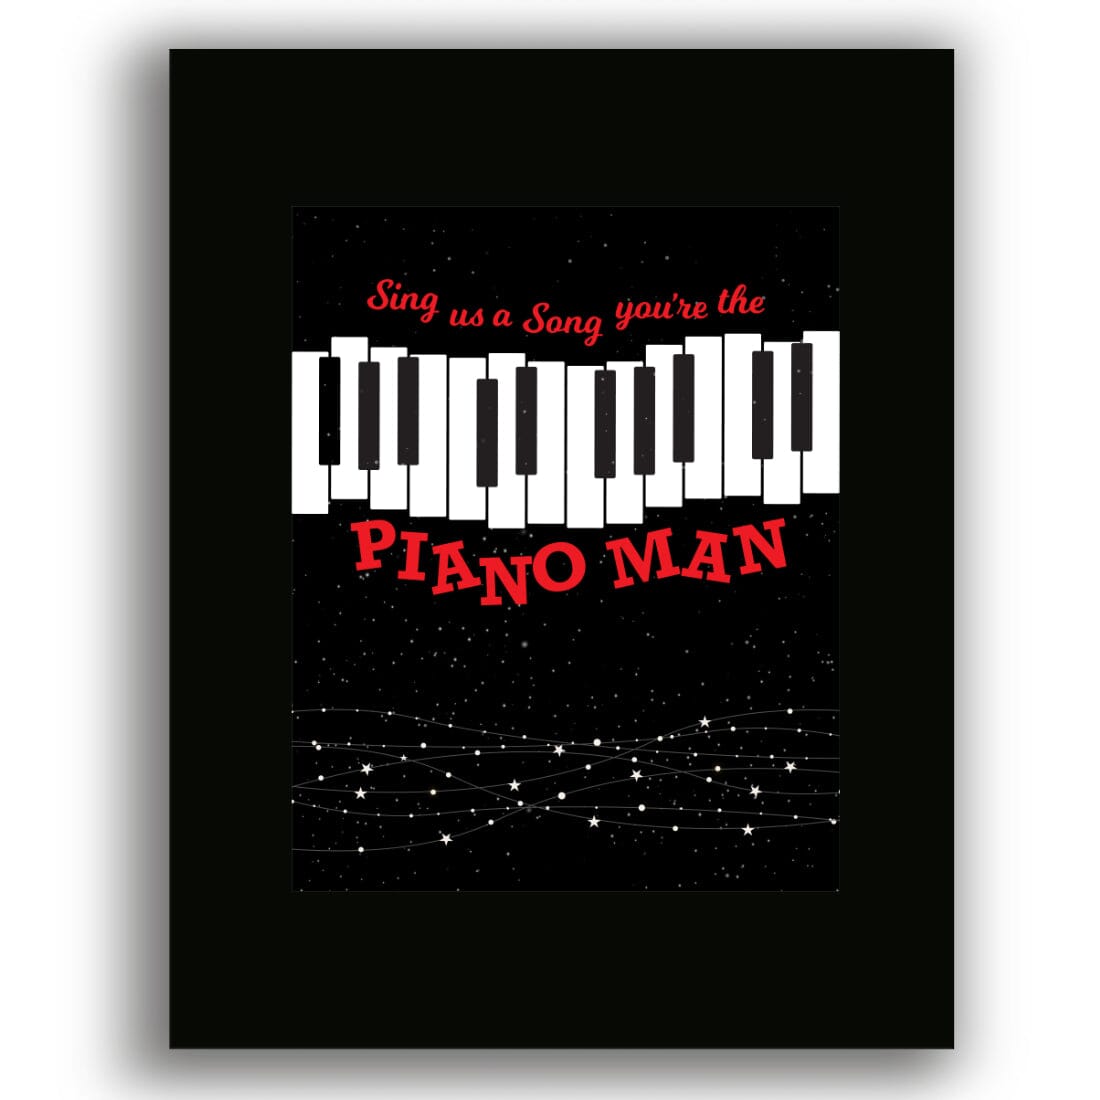 Piano Man by Billy Joel - Classic Rock Art Song Lyrics Print Song Lyrics Art Song Lyrics Art 8x10 Black Matted Print 